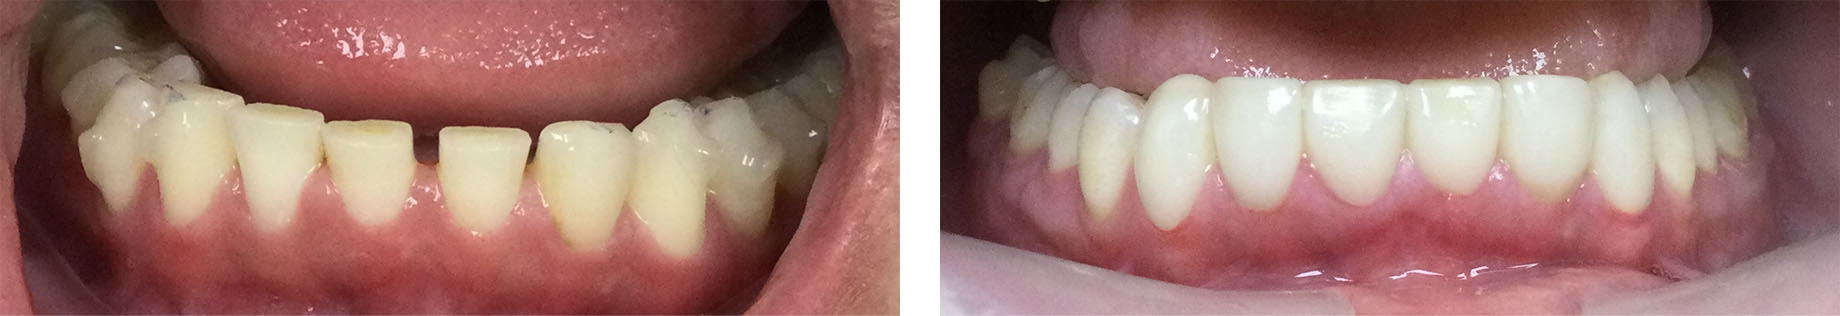 Before and After Photo - Diastema closure